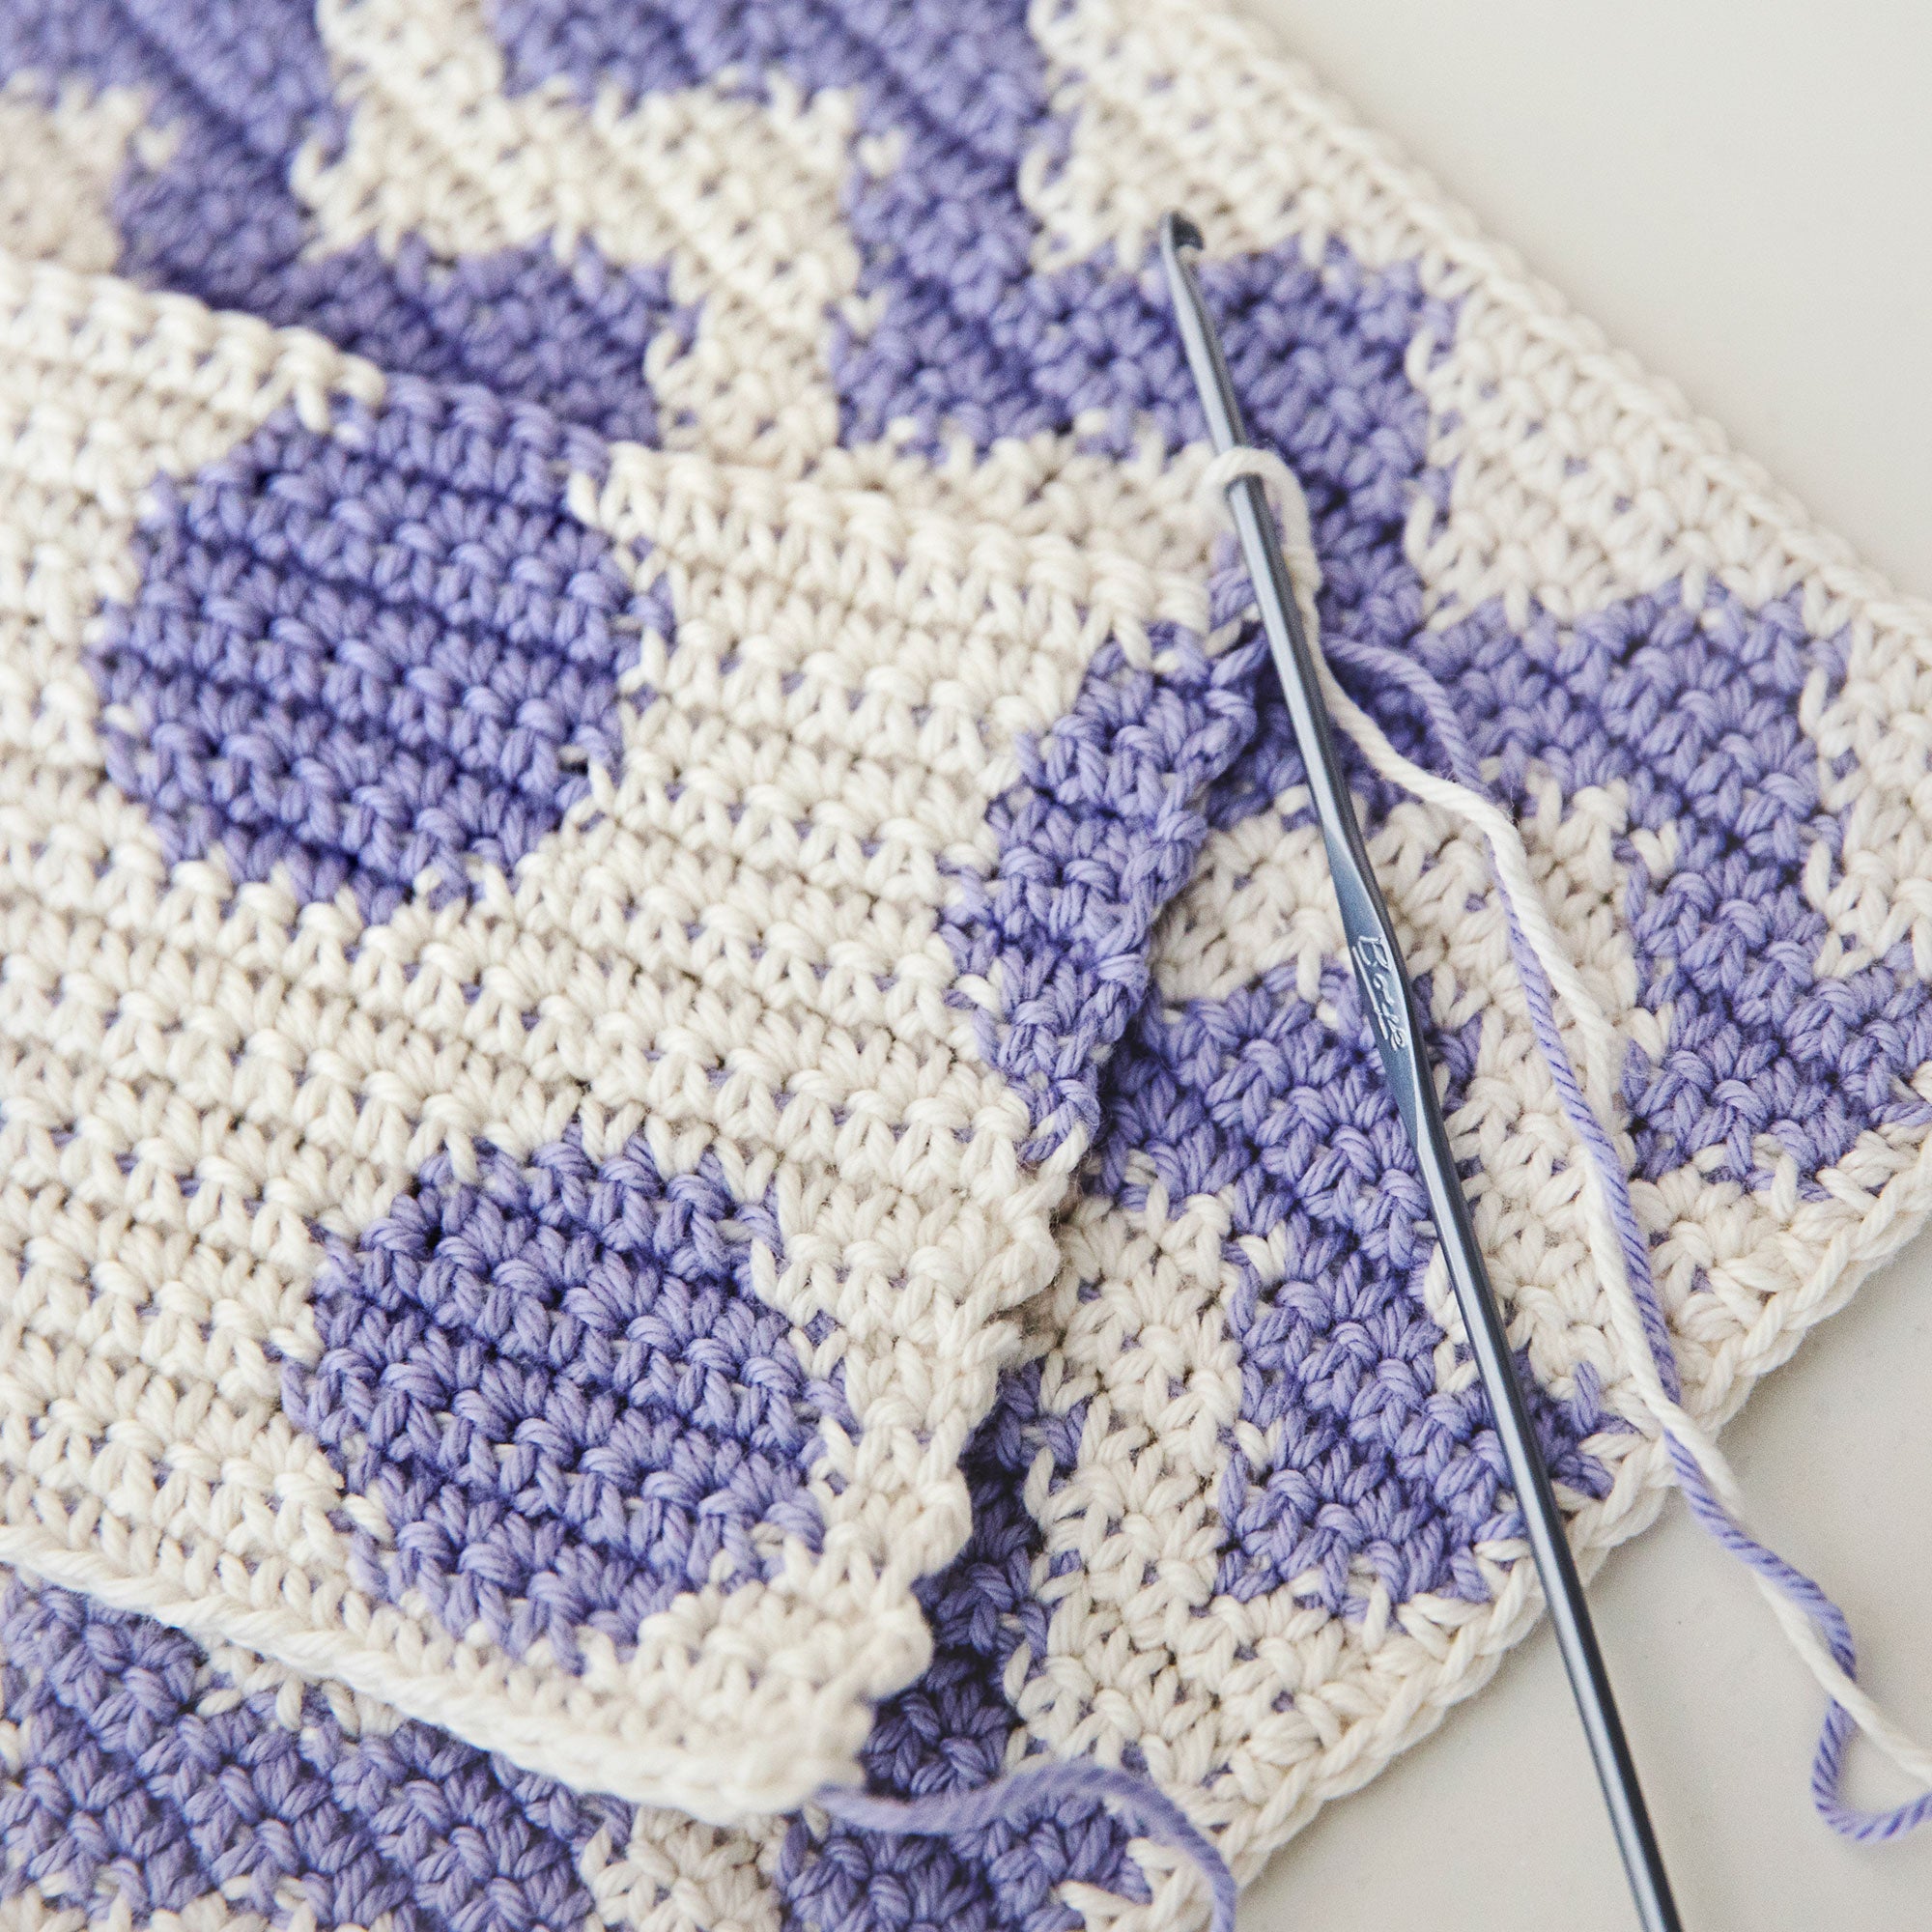 Crochet Washcloth Pattern - Beginner Friendly and Free - Leelee Knits